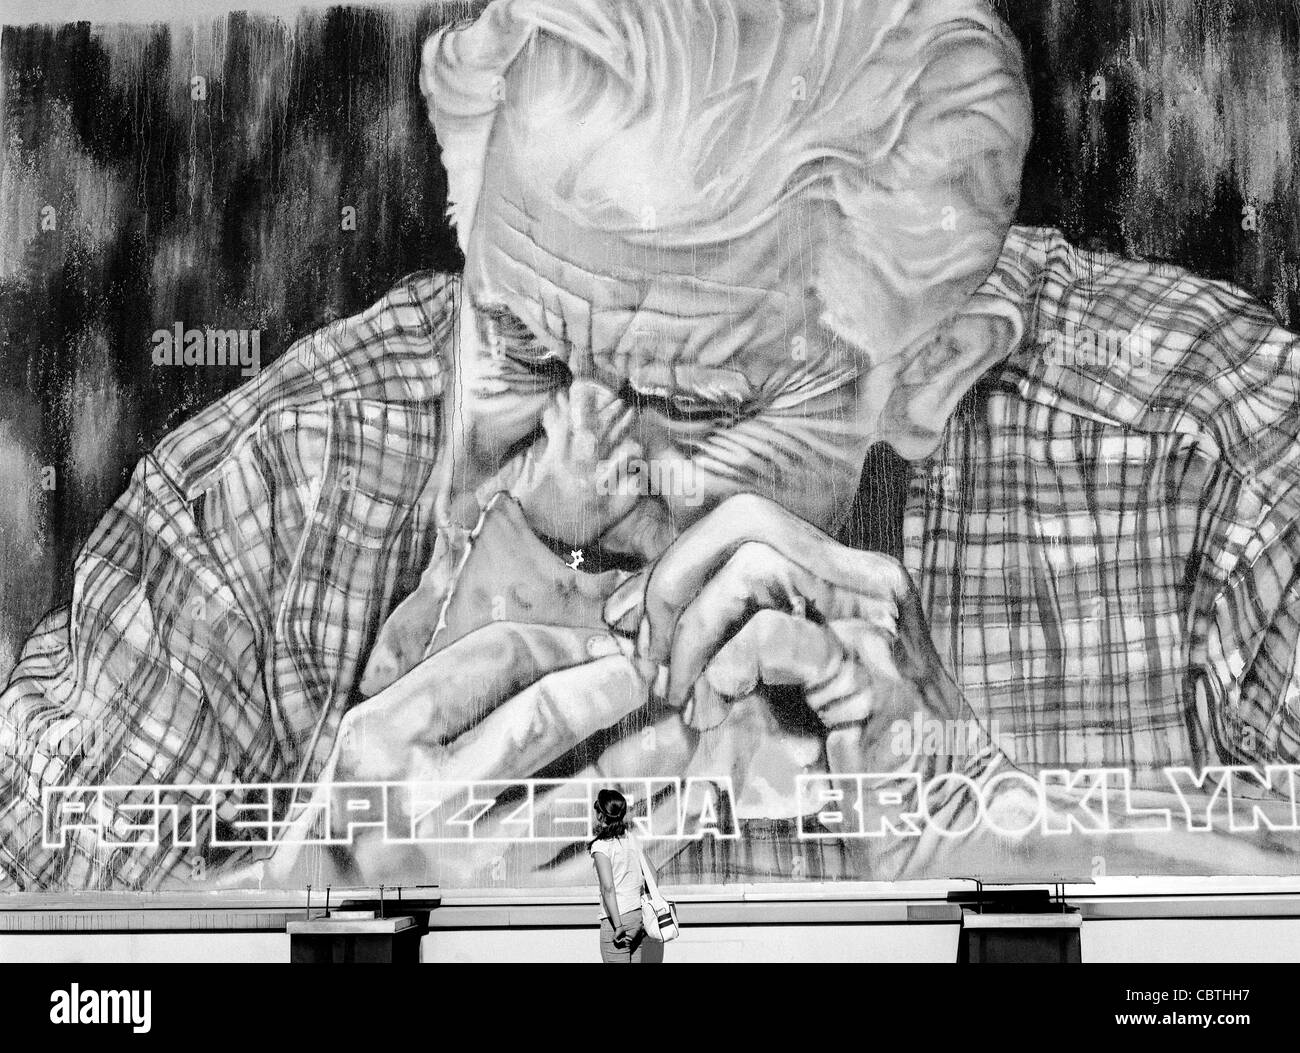 Graffiti depiction of an old man eating a slice of pizza. Stock Photo